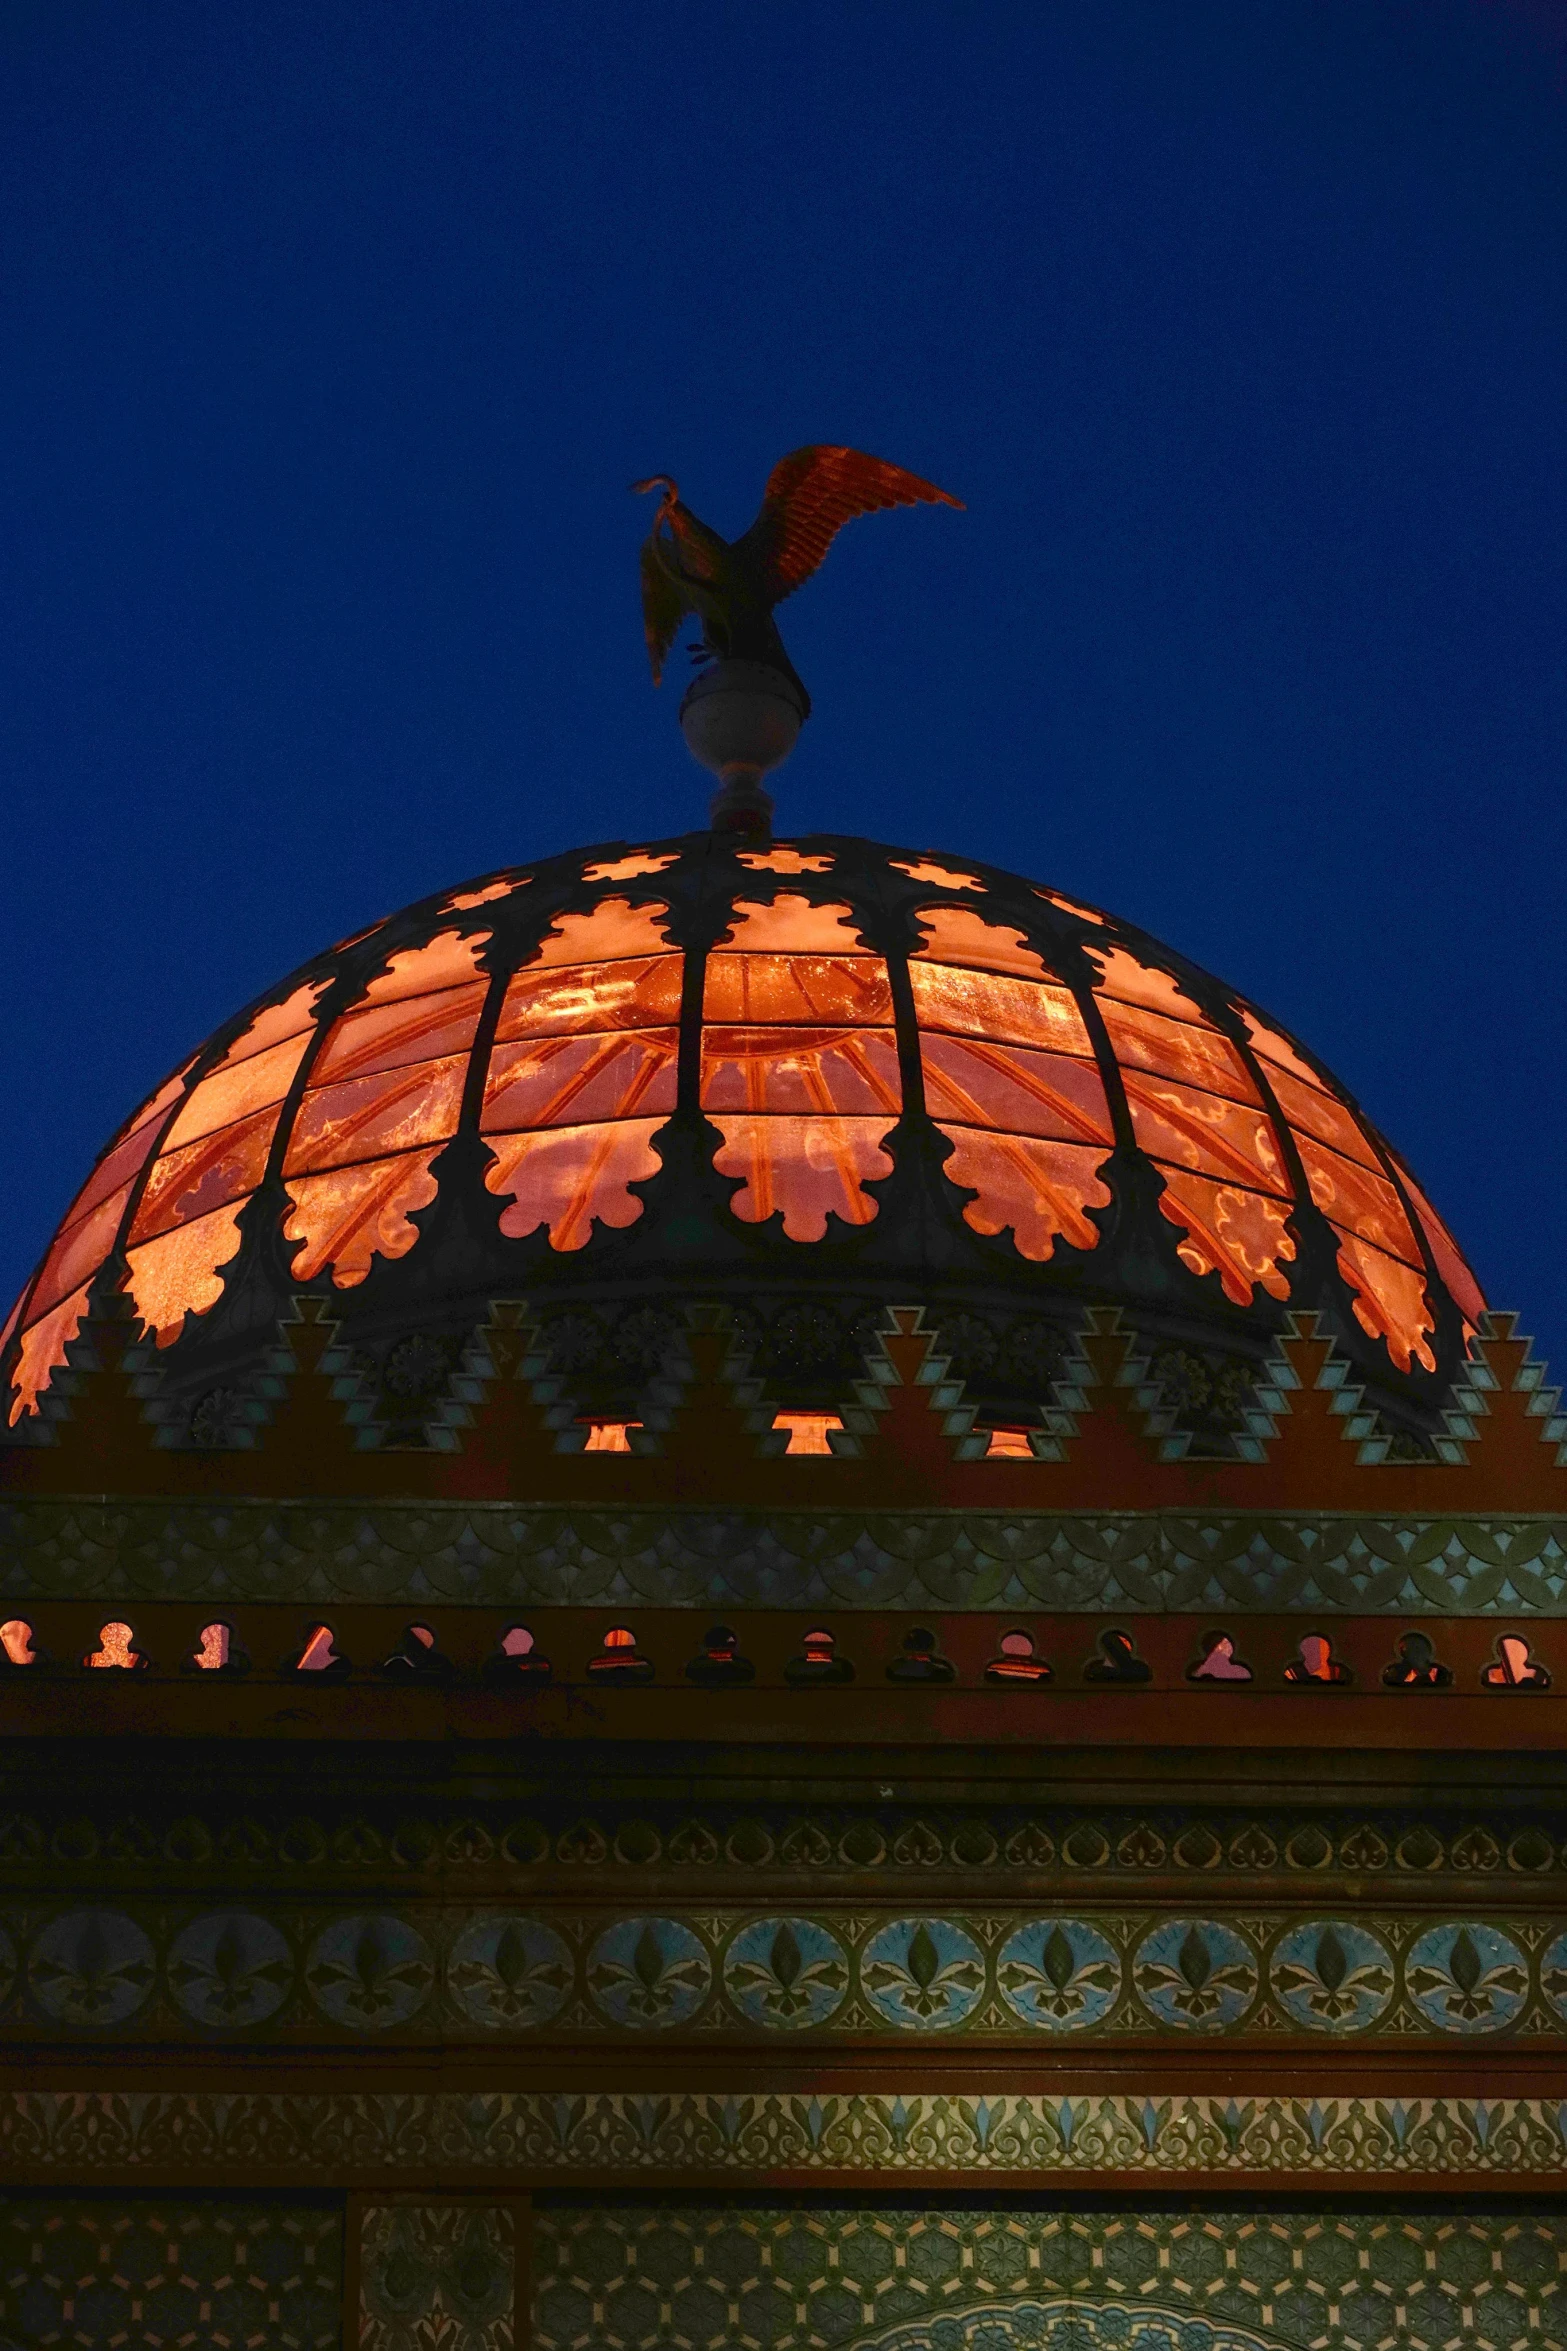 dome of structure illuminated by orange lighting with large winged figure